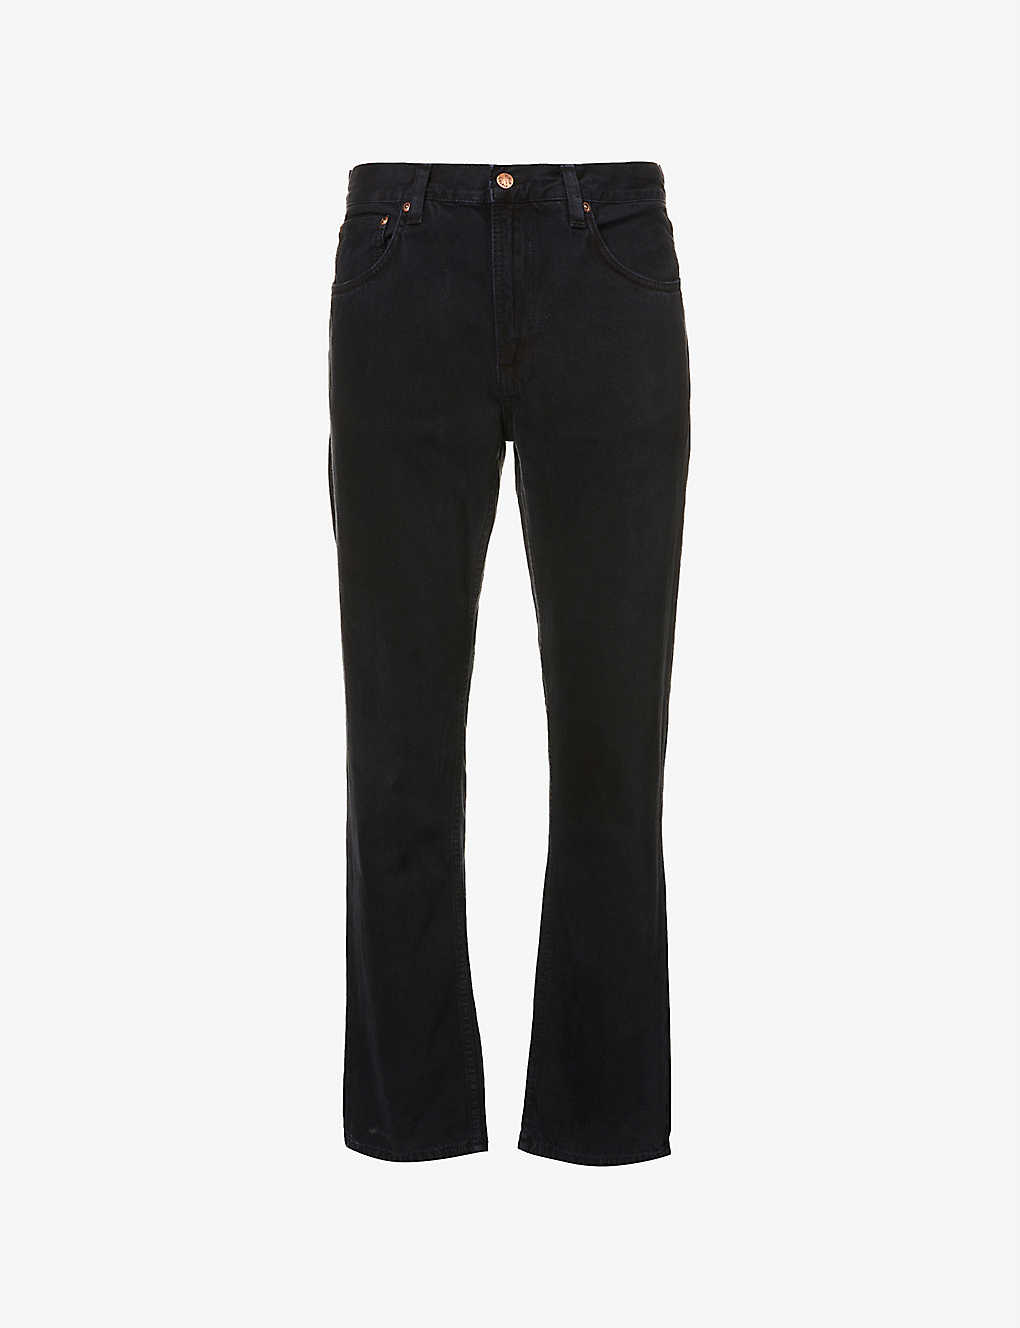 Nudie Jeans Mens Black Forest Gritty Jackson Slim-fit Straight Denim Jeans